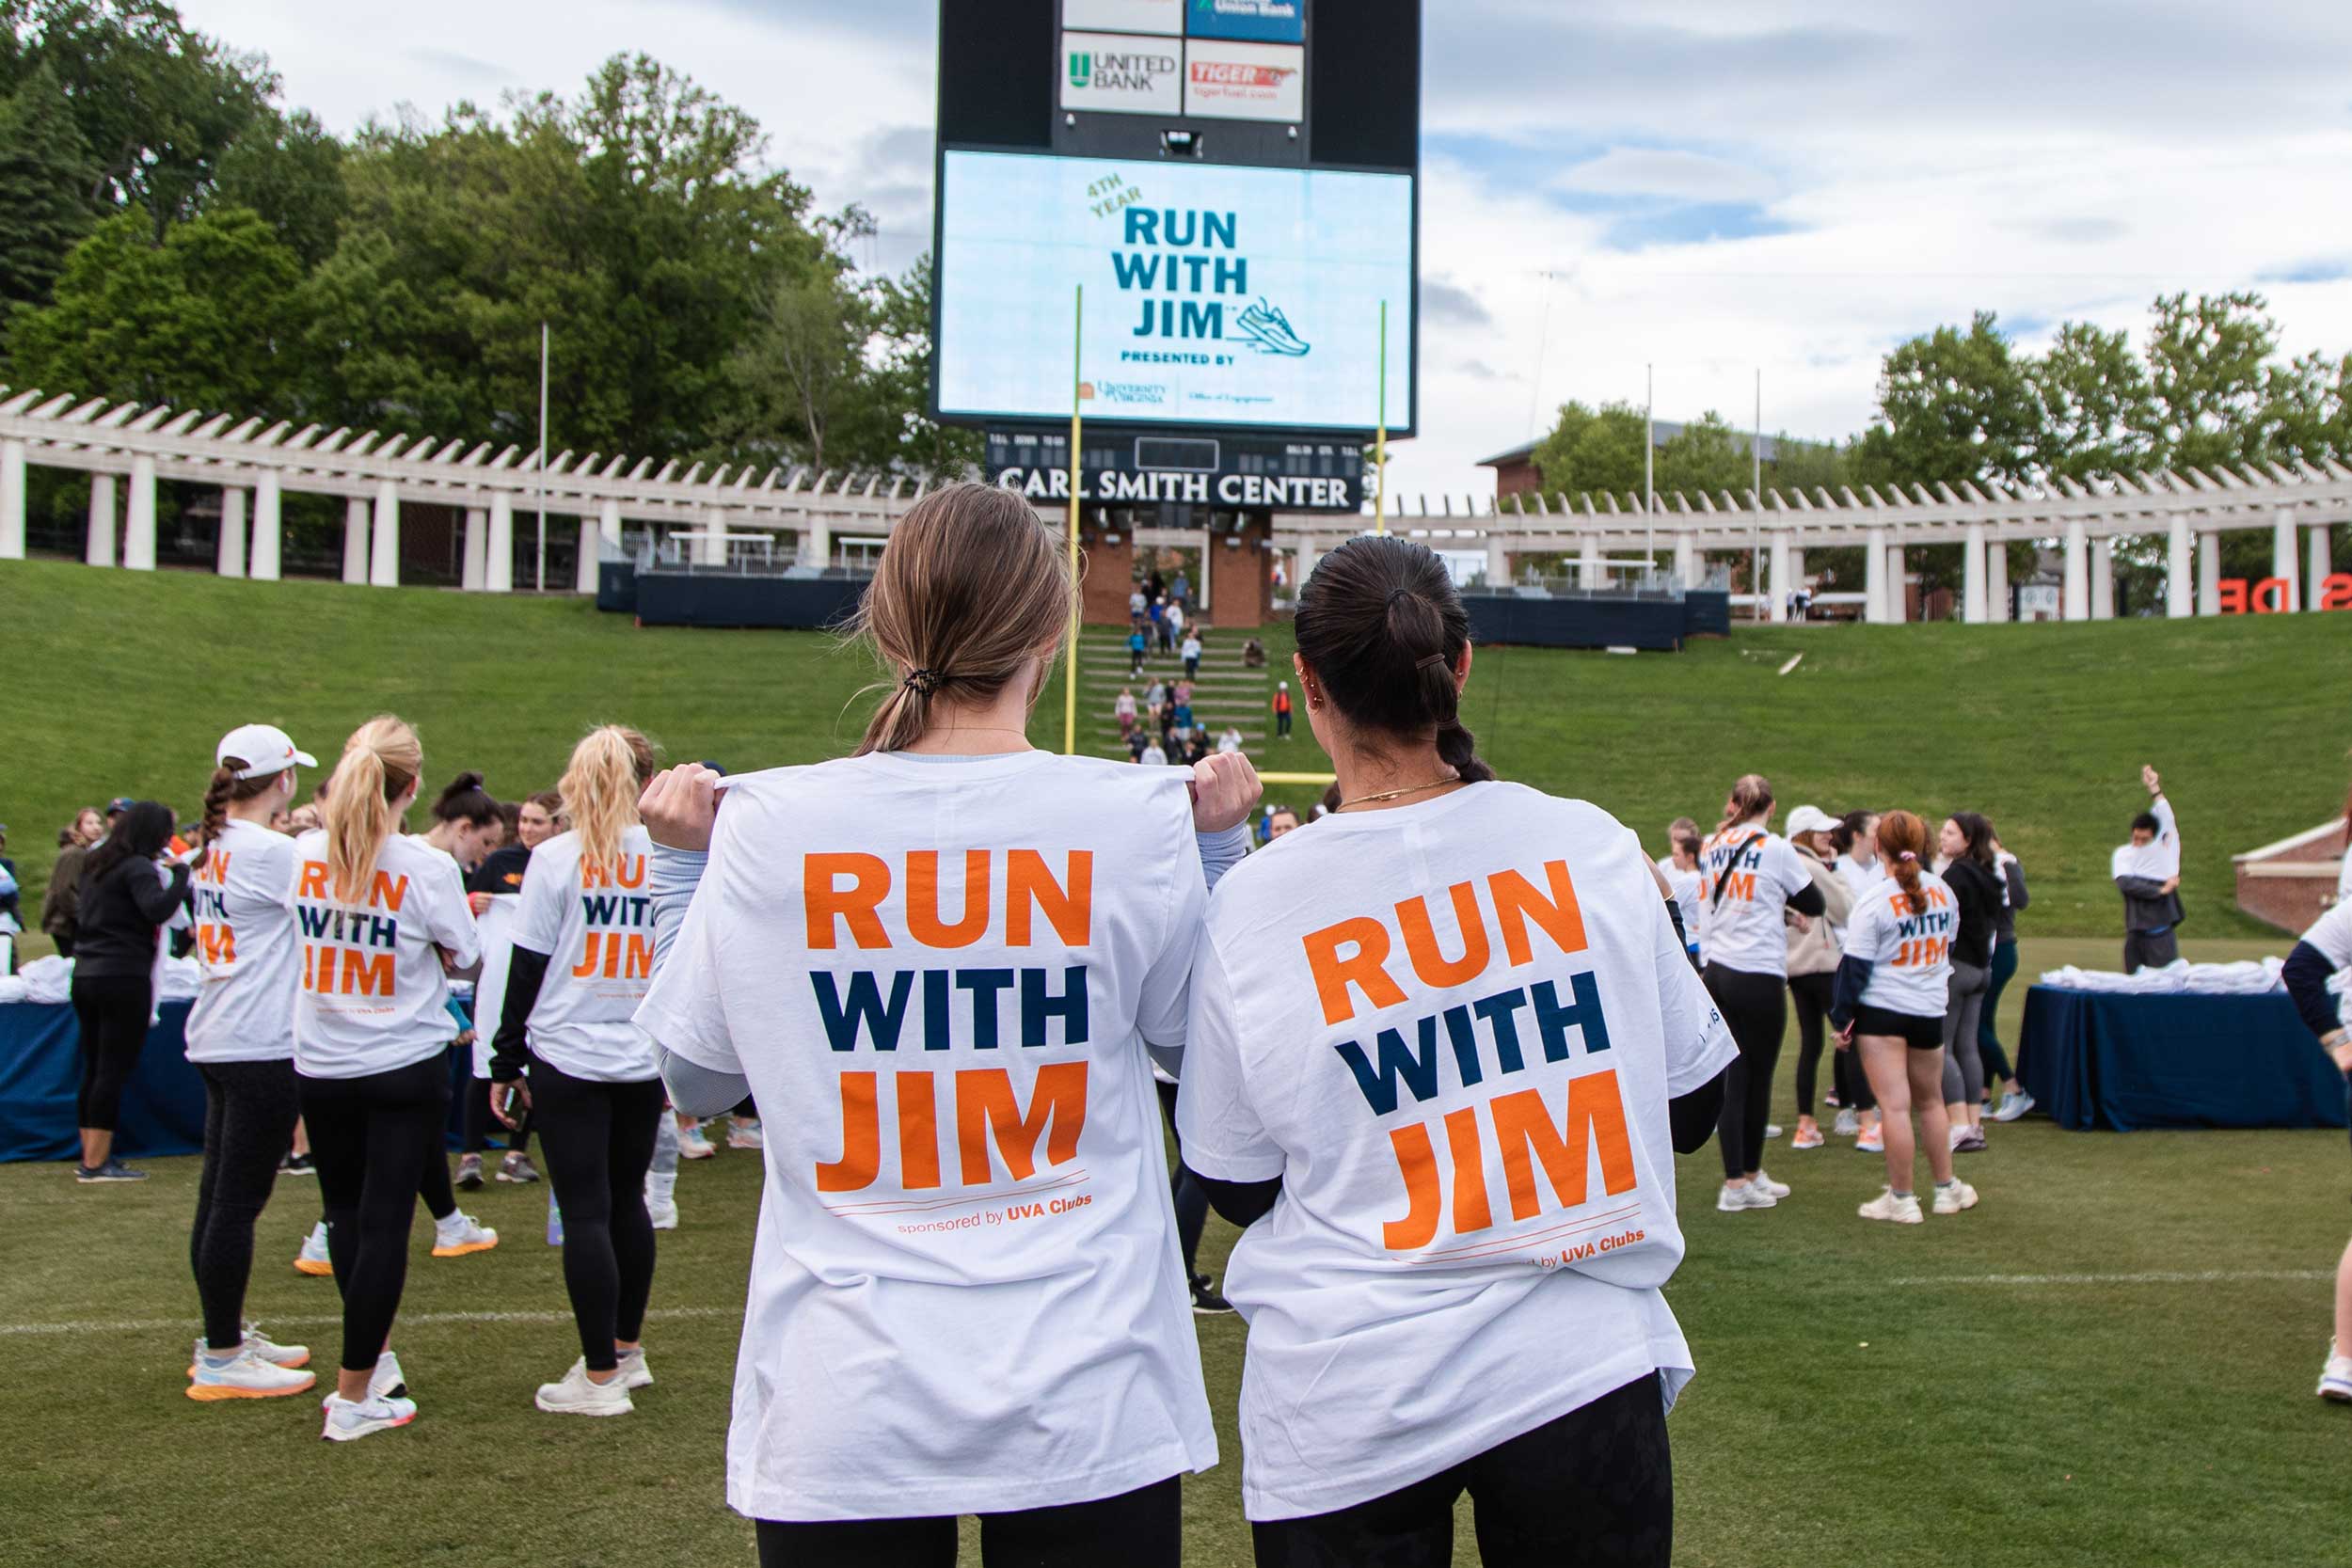 Two students face away from the camera showing off their "Run with Jim" shirts